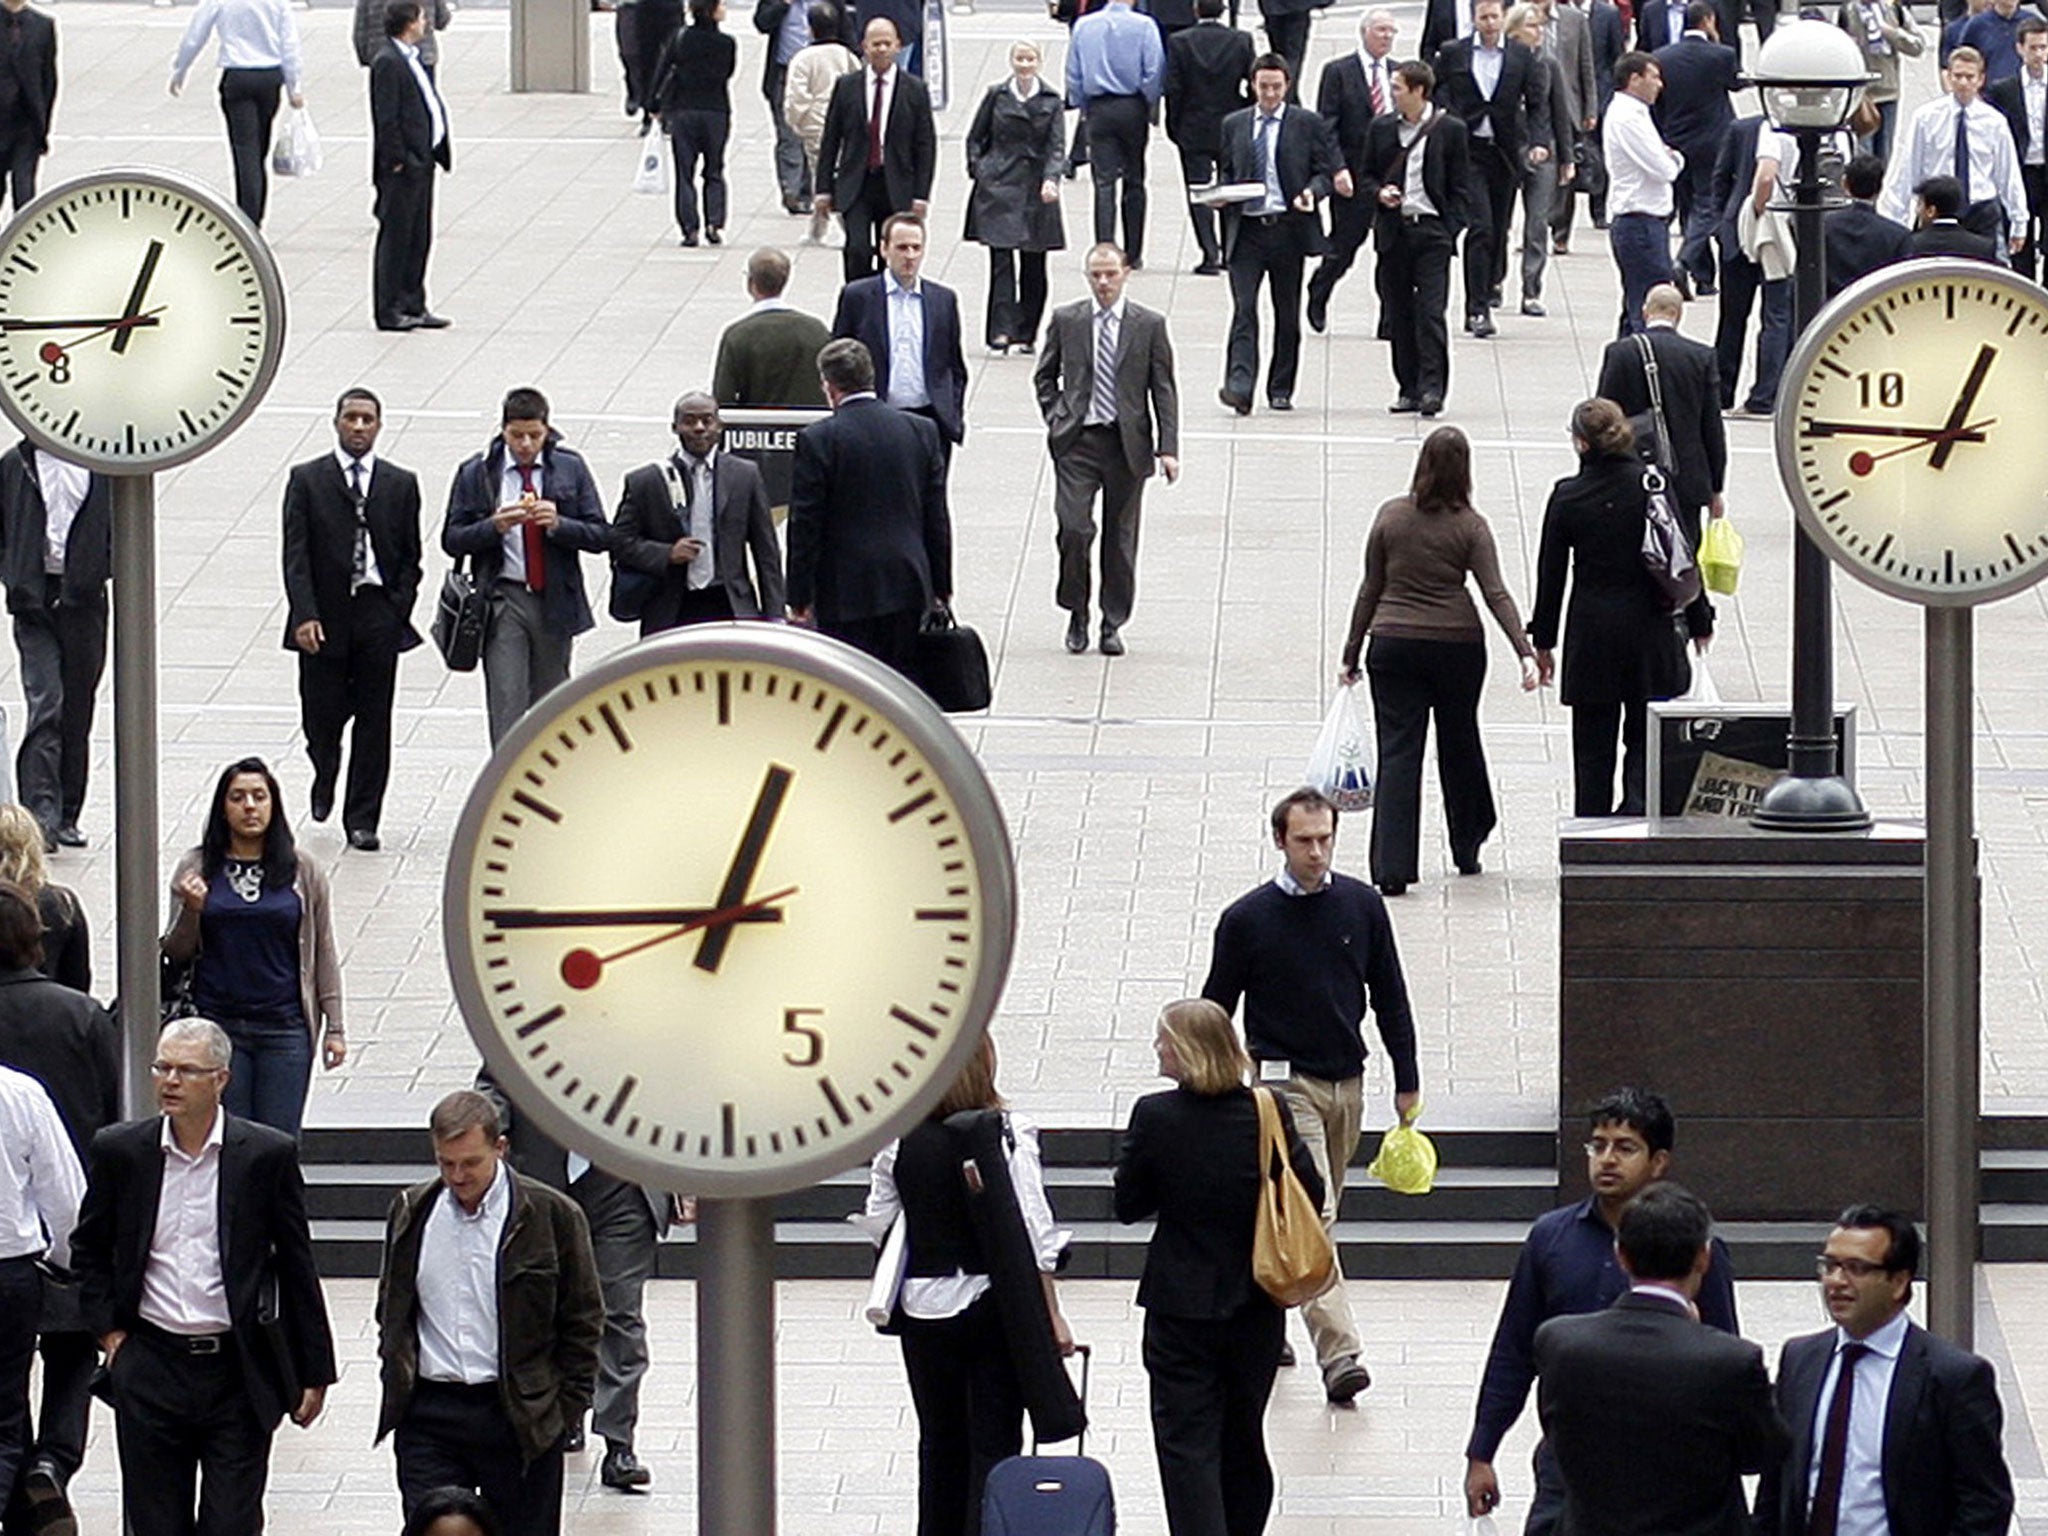 Women working full-time in London earn an average of 14.6 per cent less per hour than their male counterparts